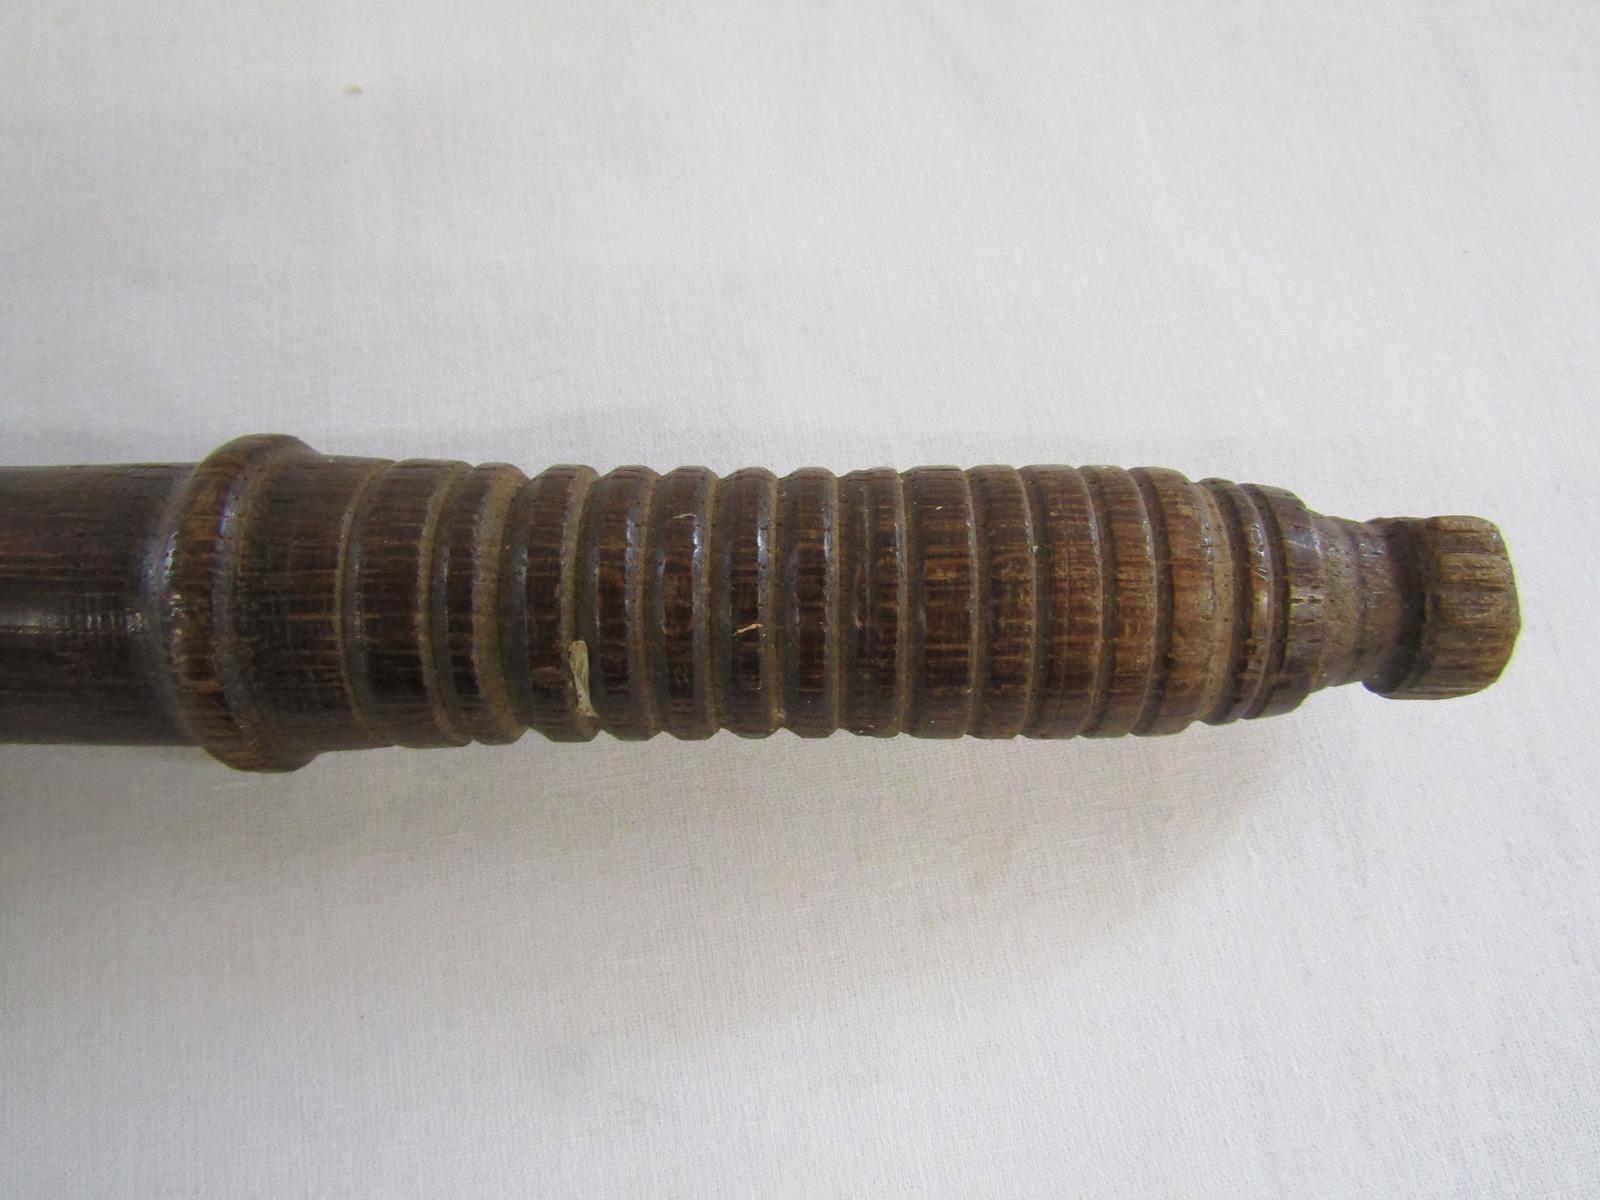 Truncheon - possibly police approx. 52cm long - Image 3 of 4